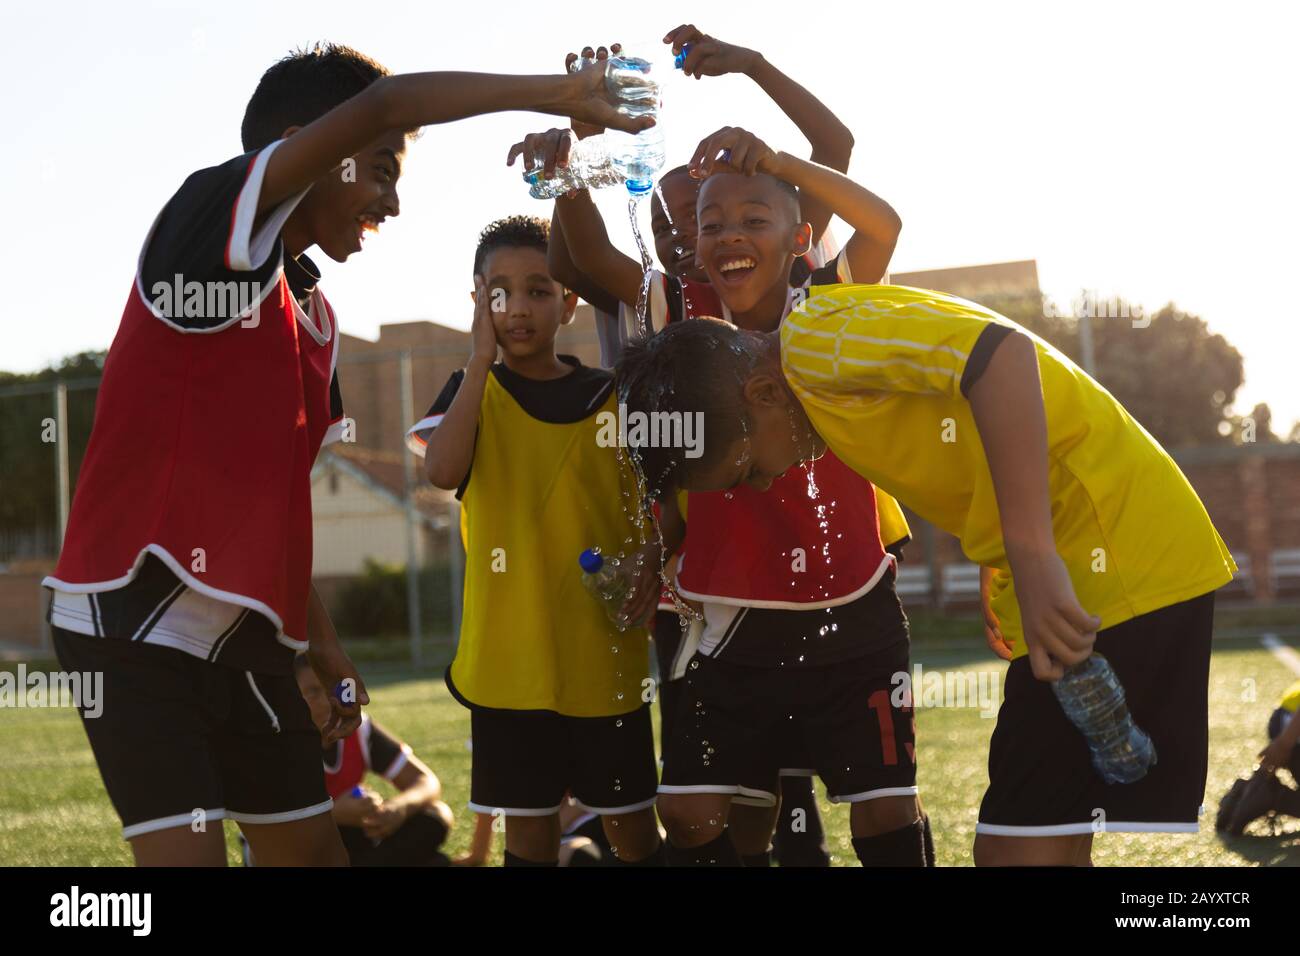 Soccer players putting water on their friend head Stock Photo